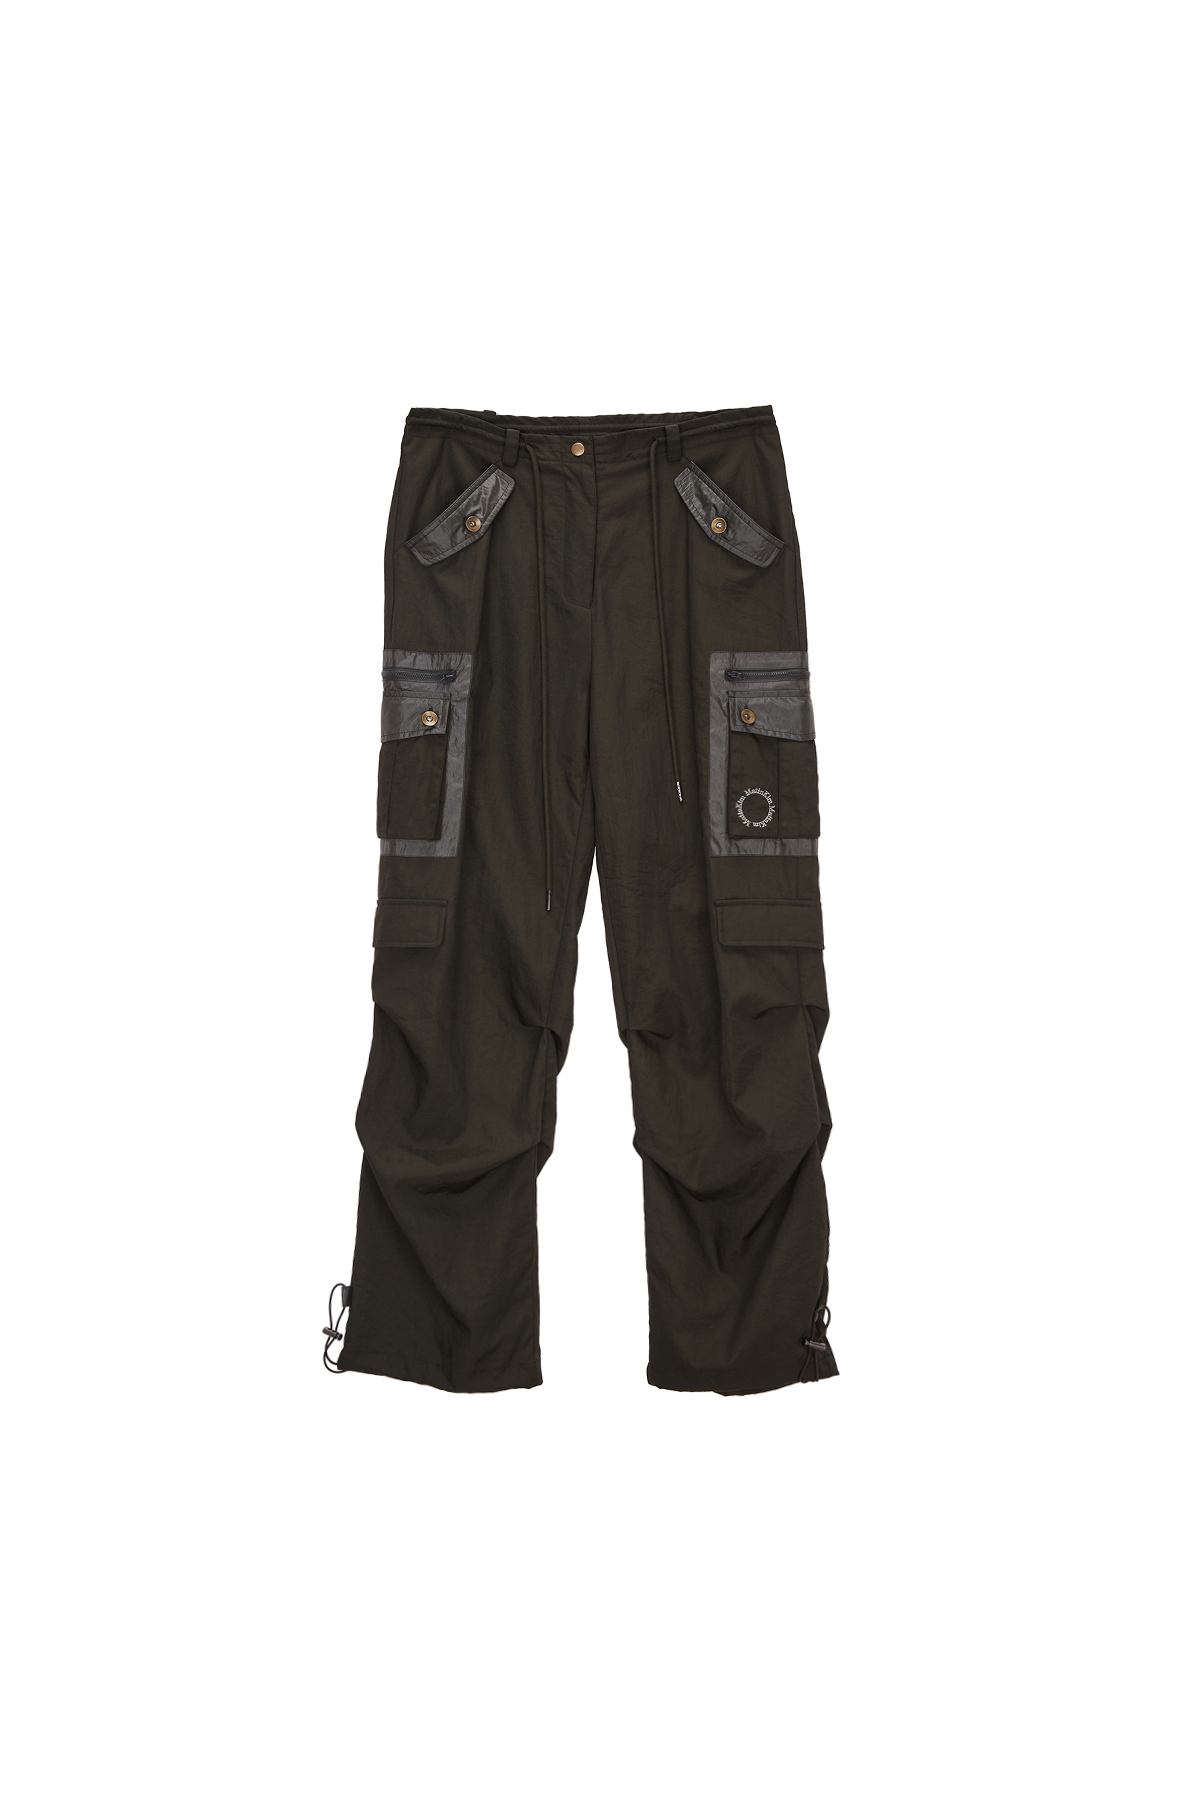 Men's High Stretch Multi-Pocket Skinny Cargo Pants,Outdoor Casual